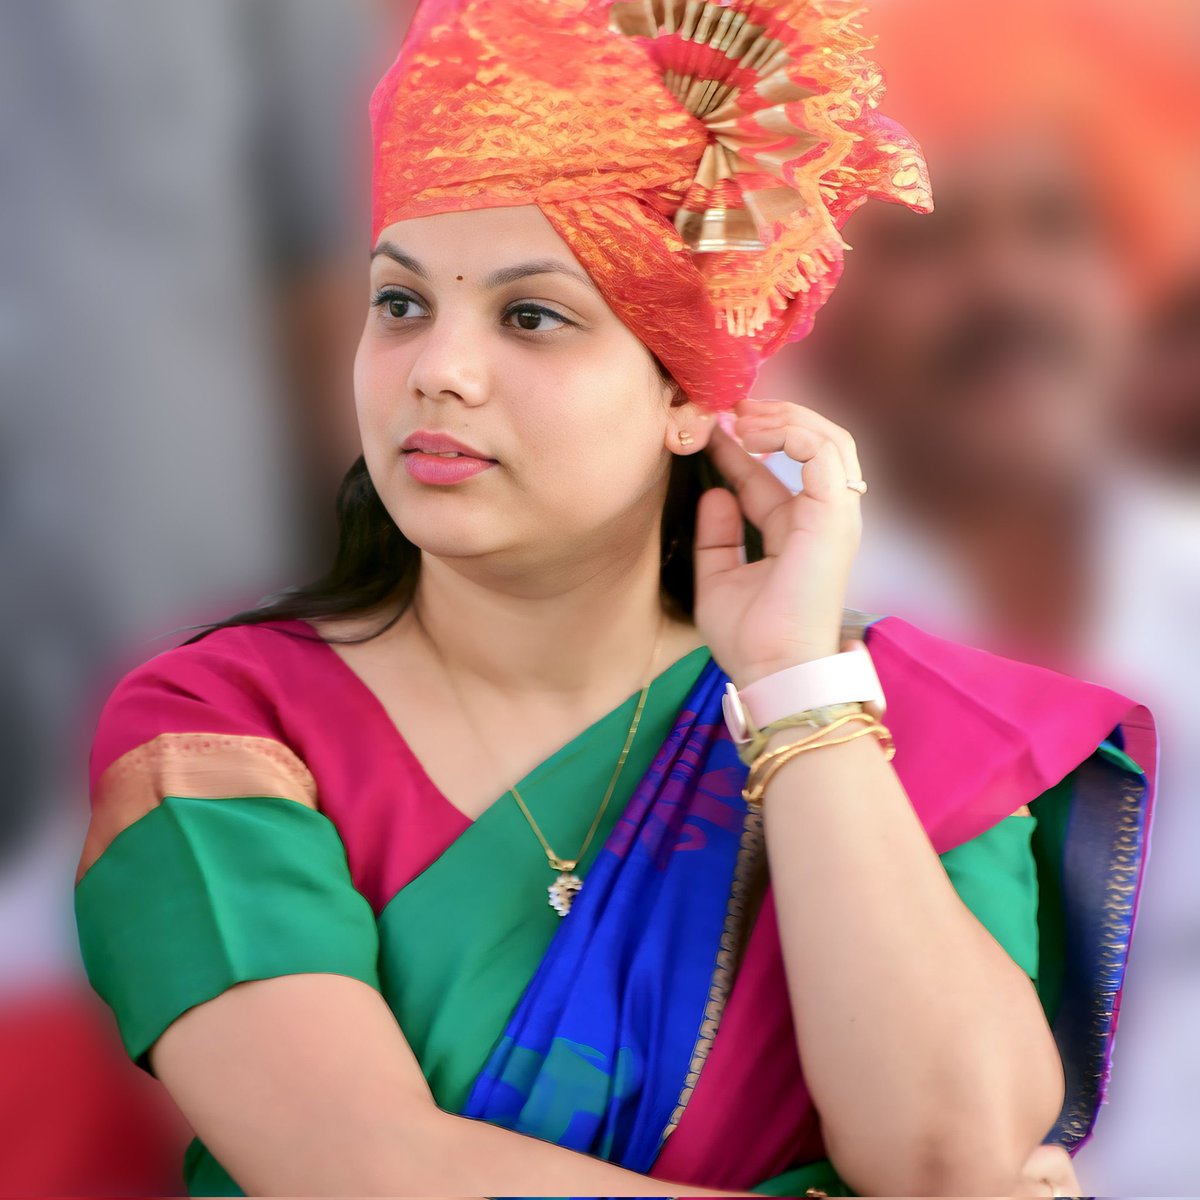 Happy Birthday to the Dynamic & most Respected IAS officer & Humanist @PamelaSatpathy madam💐